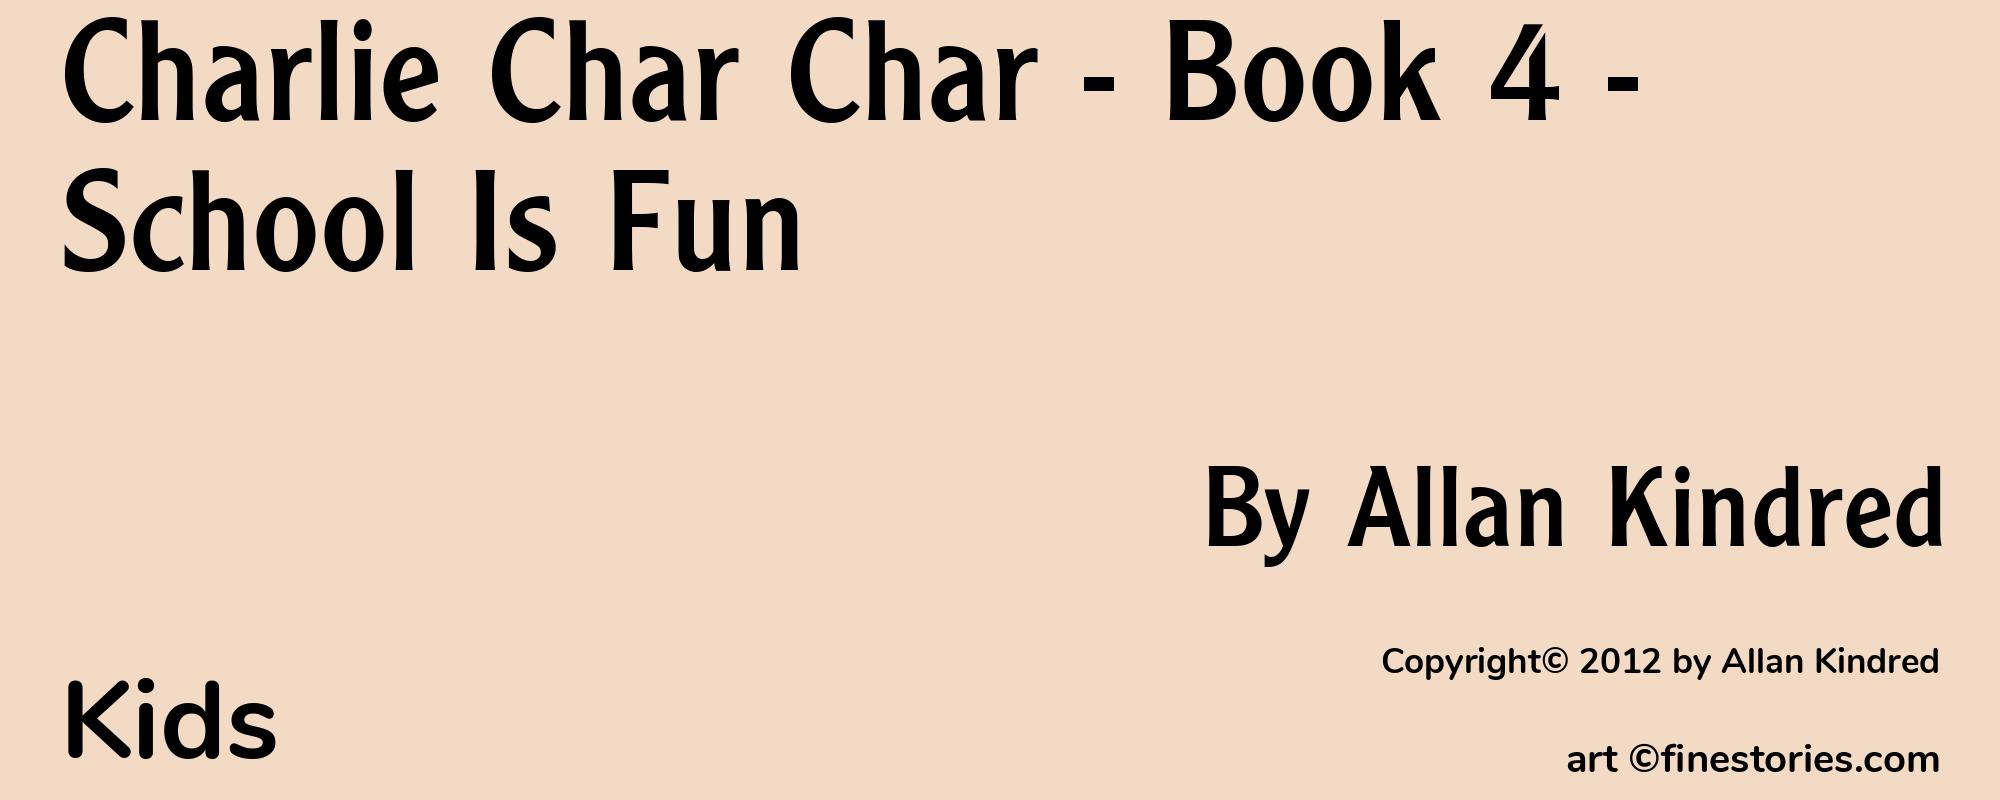 Charlie Char Char - Book 4 - School Is Fun - Cover